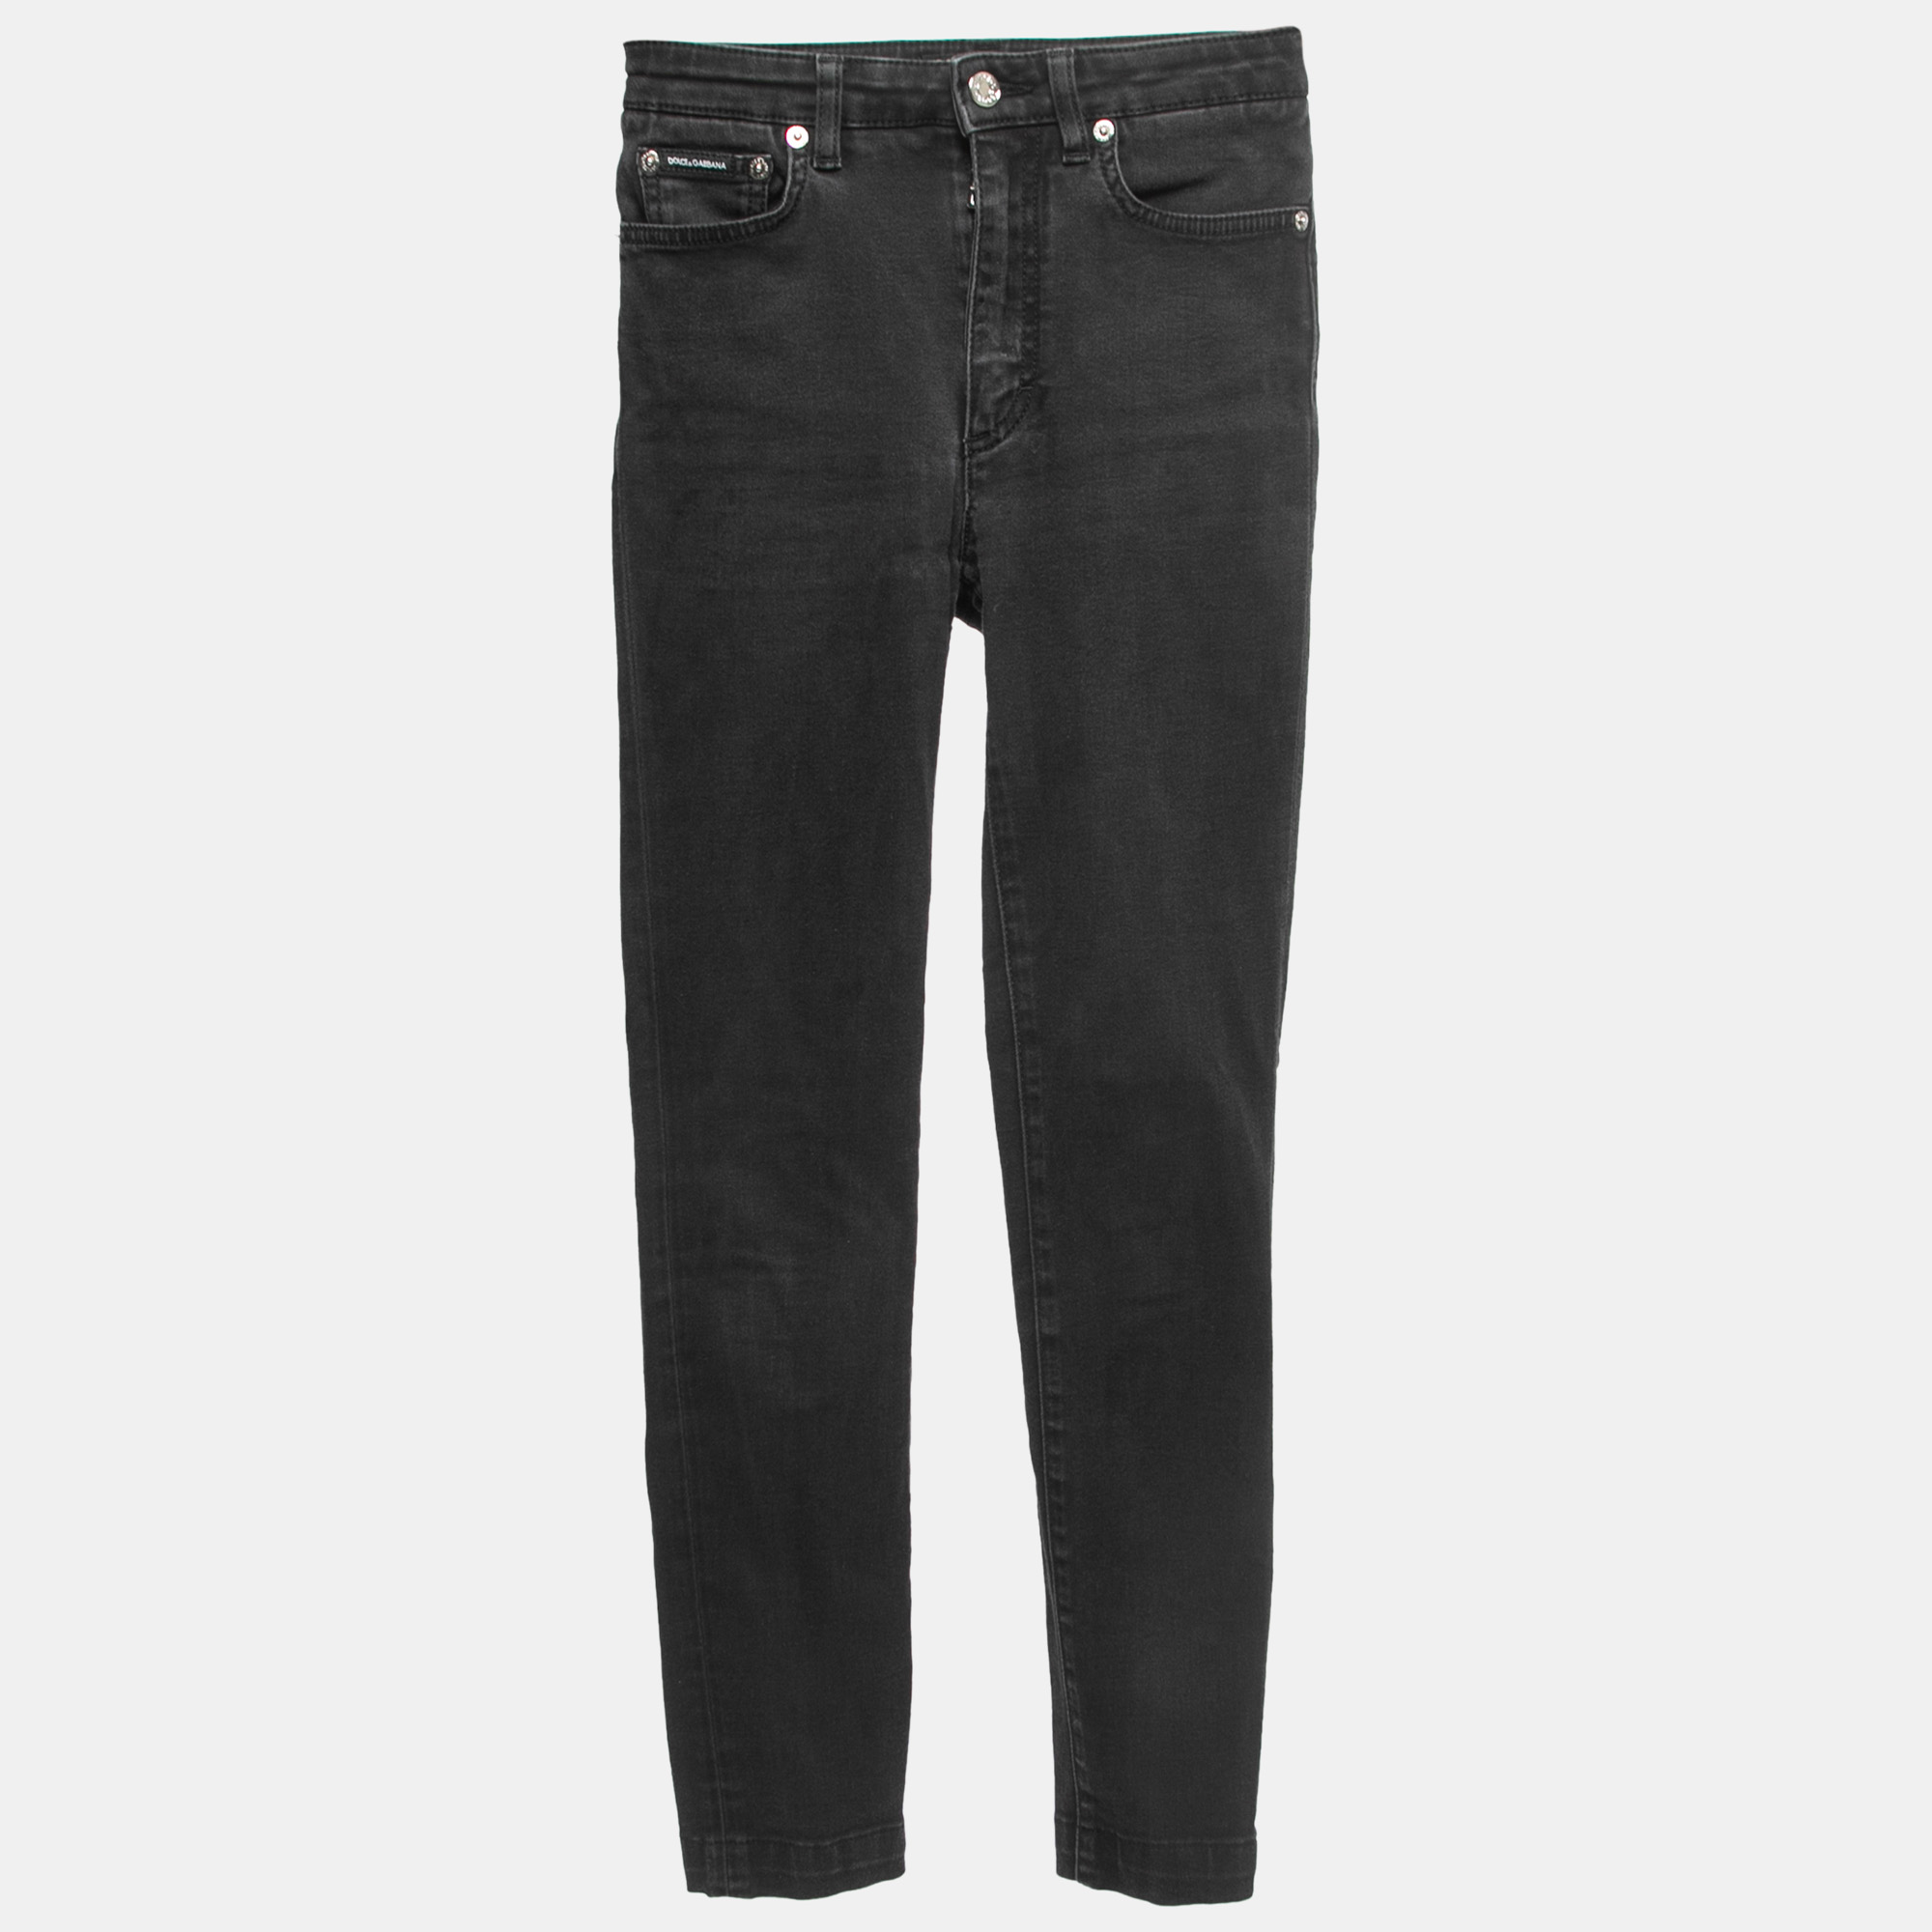 Impeccably tailored jeans are a staple in a well curated wardrobe. These designer jeans are finely sewn to give you the desired look and all day comfort.